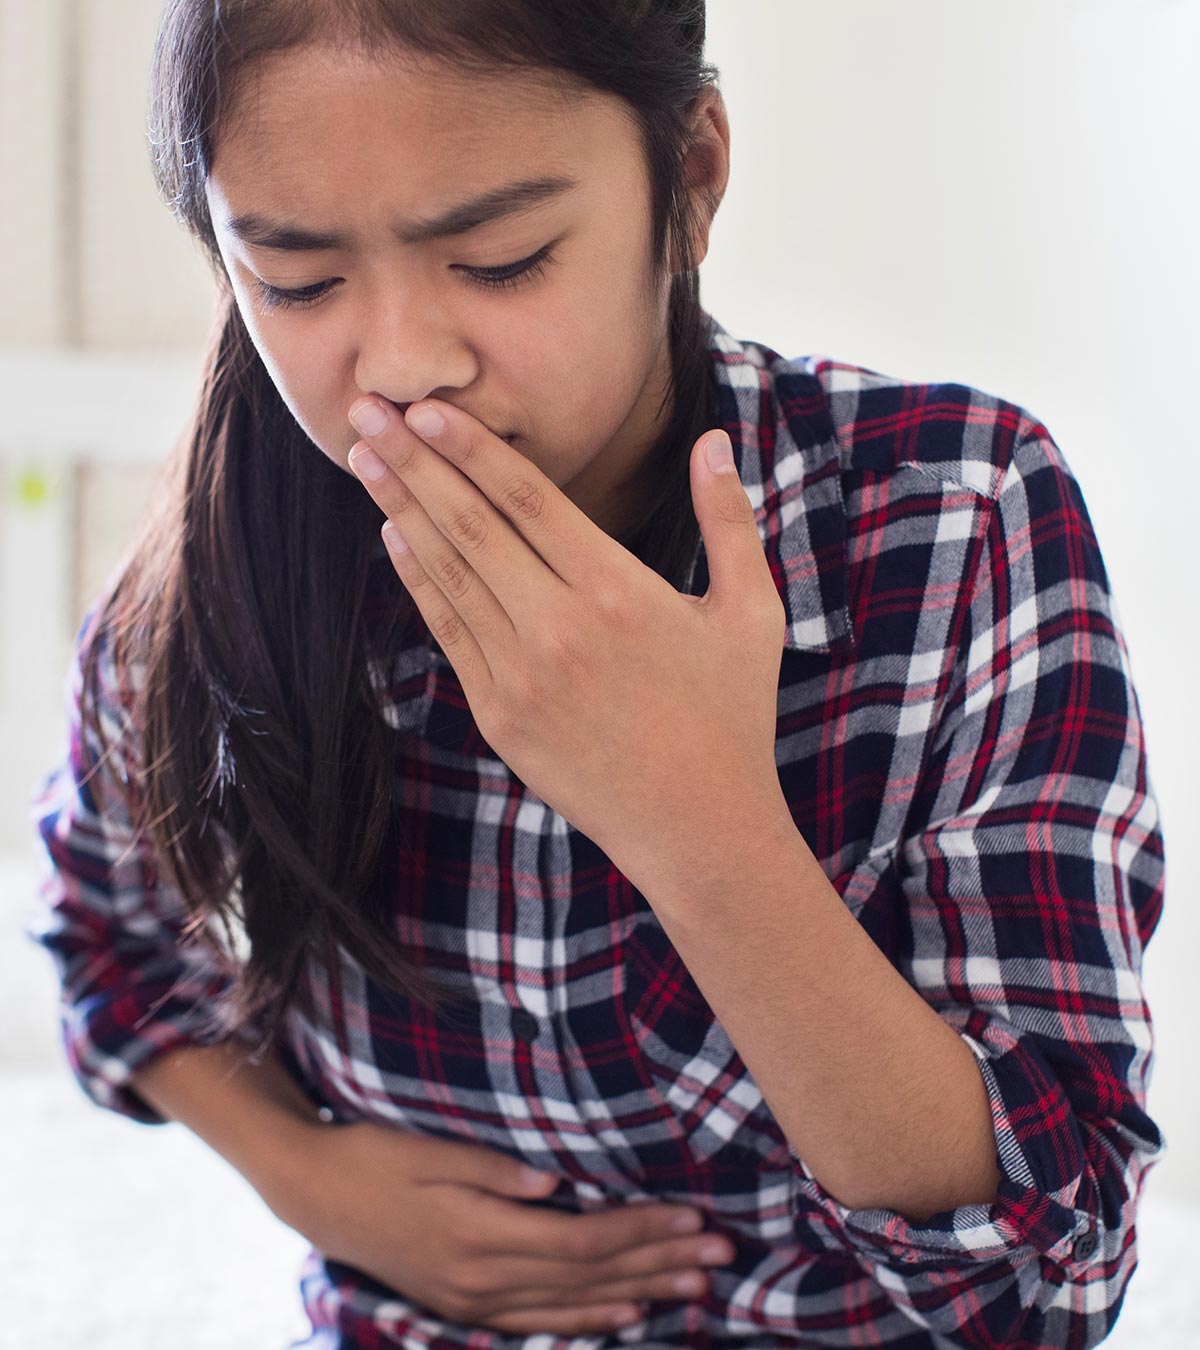 6 Causes Of Vomiting In Children, Treatment & Home Remedies